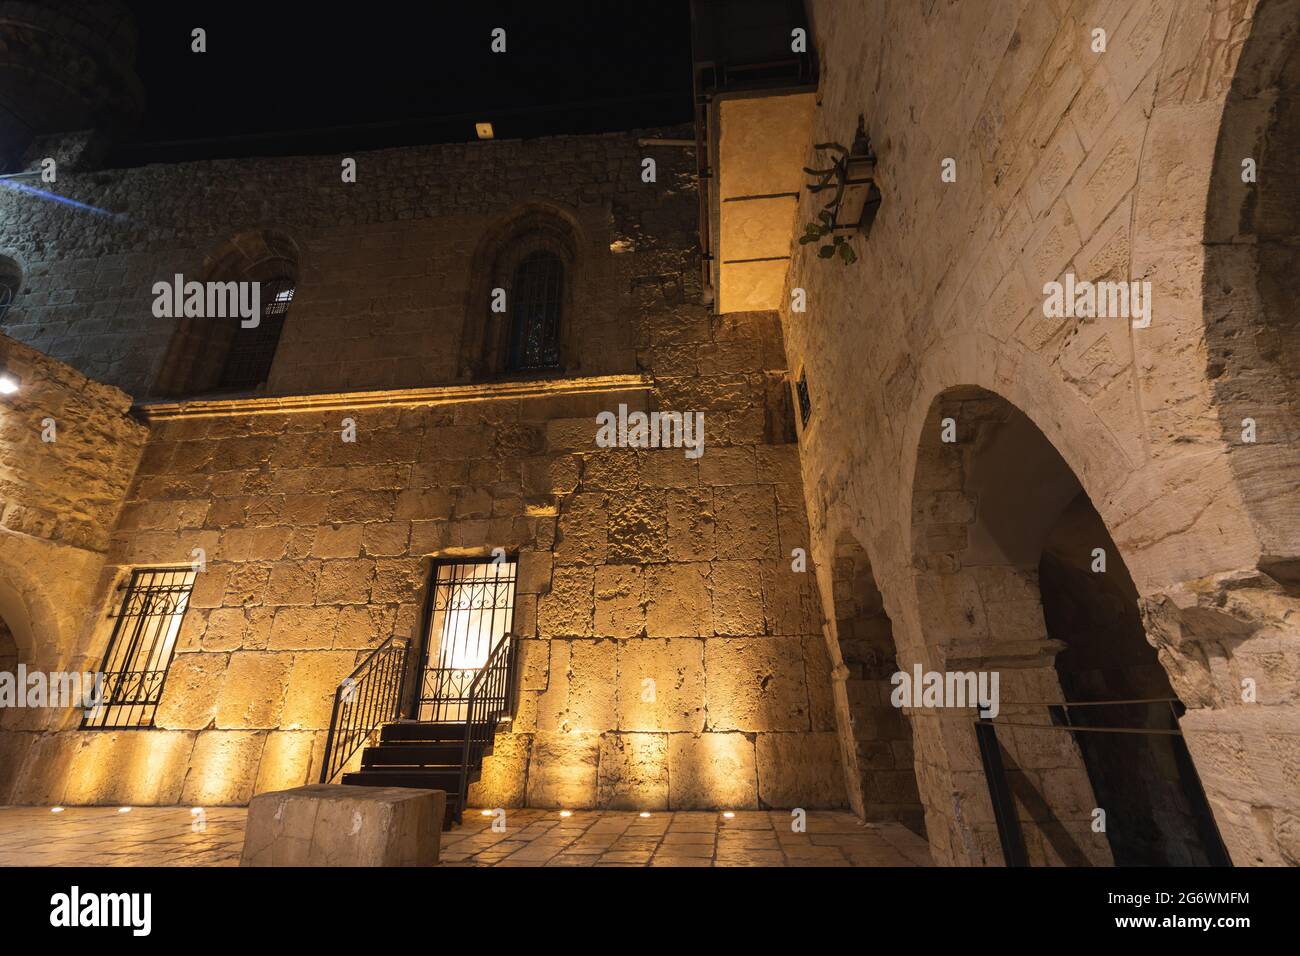 Exterior view of the ancient cave where the famous tomb of King David is located in the Old City of Jerusalem, at night Stock Photo